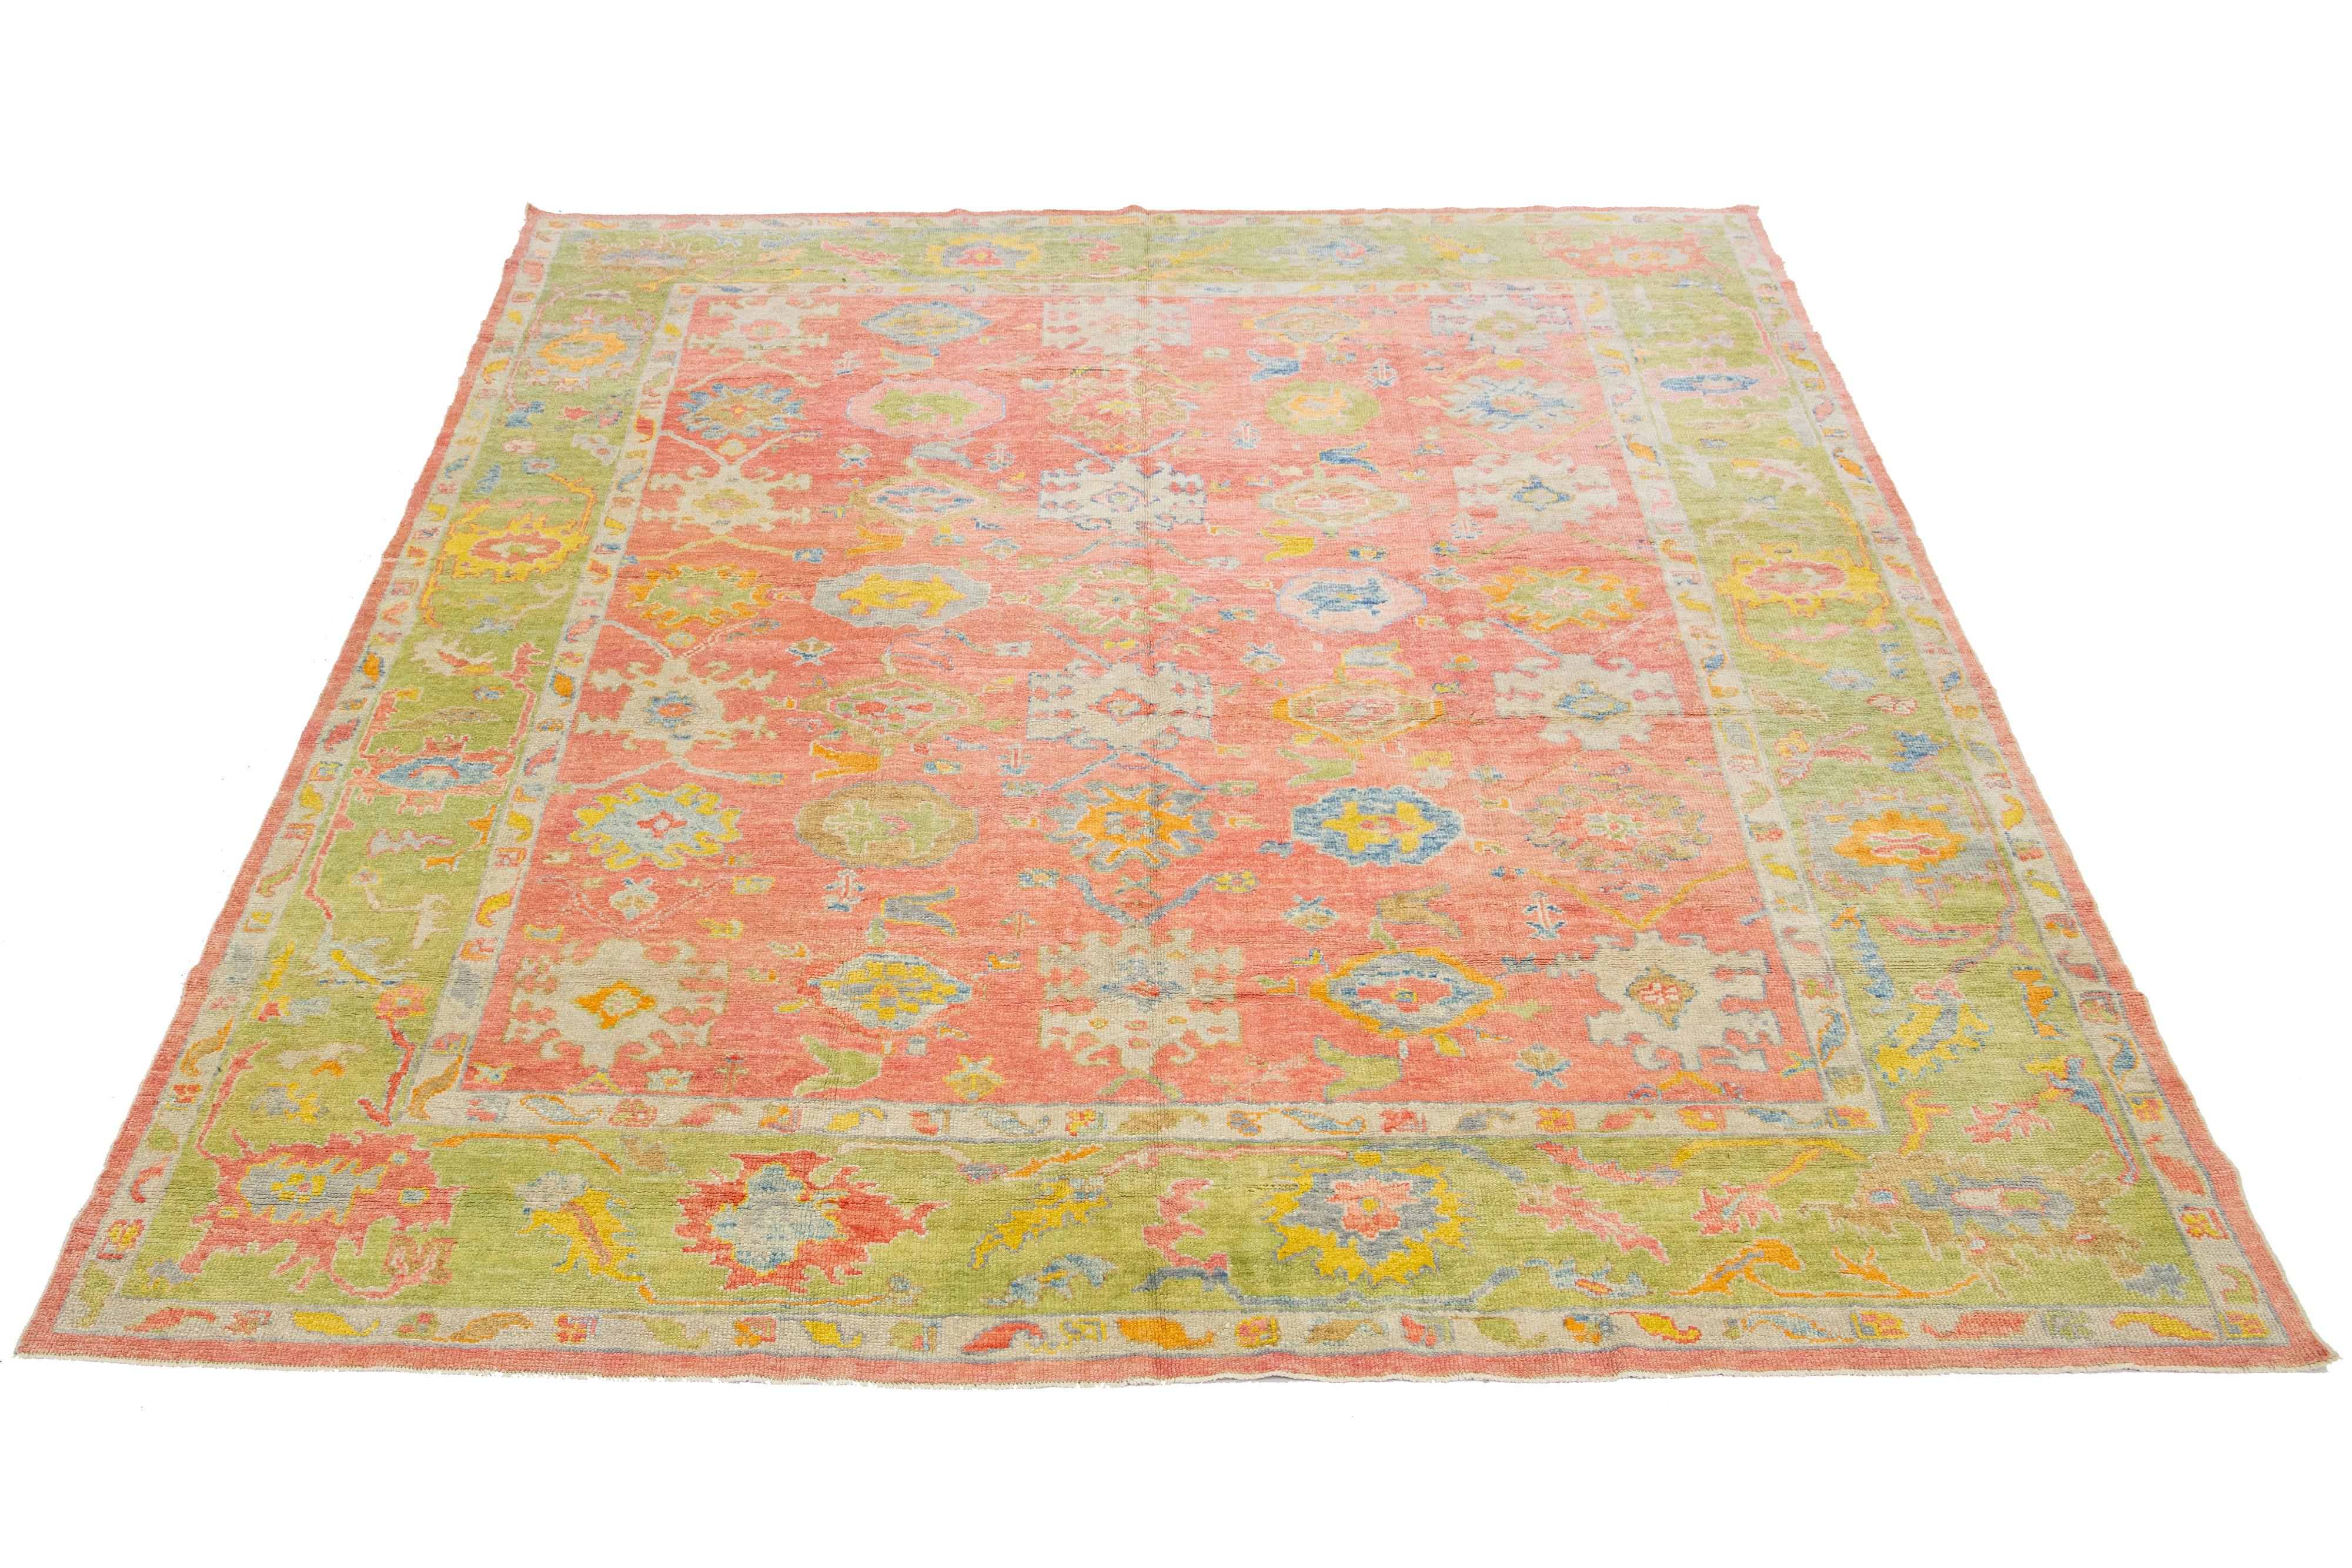 Beautiful modern Oushak hand knotted wool rug with a pink field. This Oushak rug has a green frame and multi-color accents all-over a gorgeous geometric floral design.

This rug measures 10'8